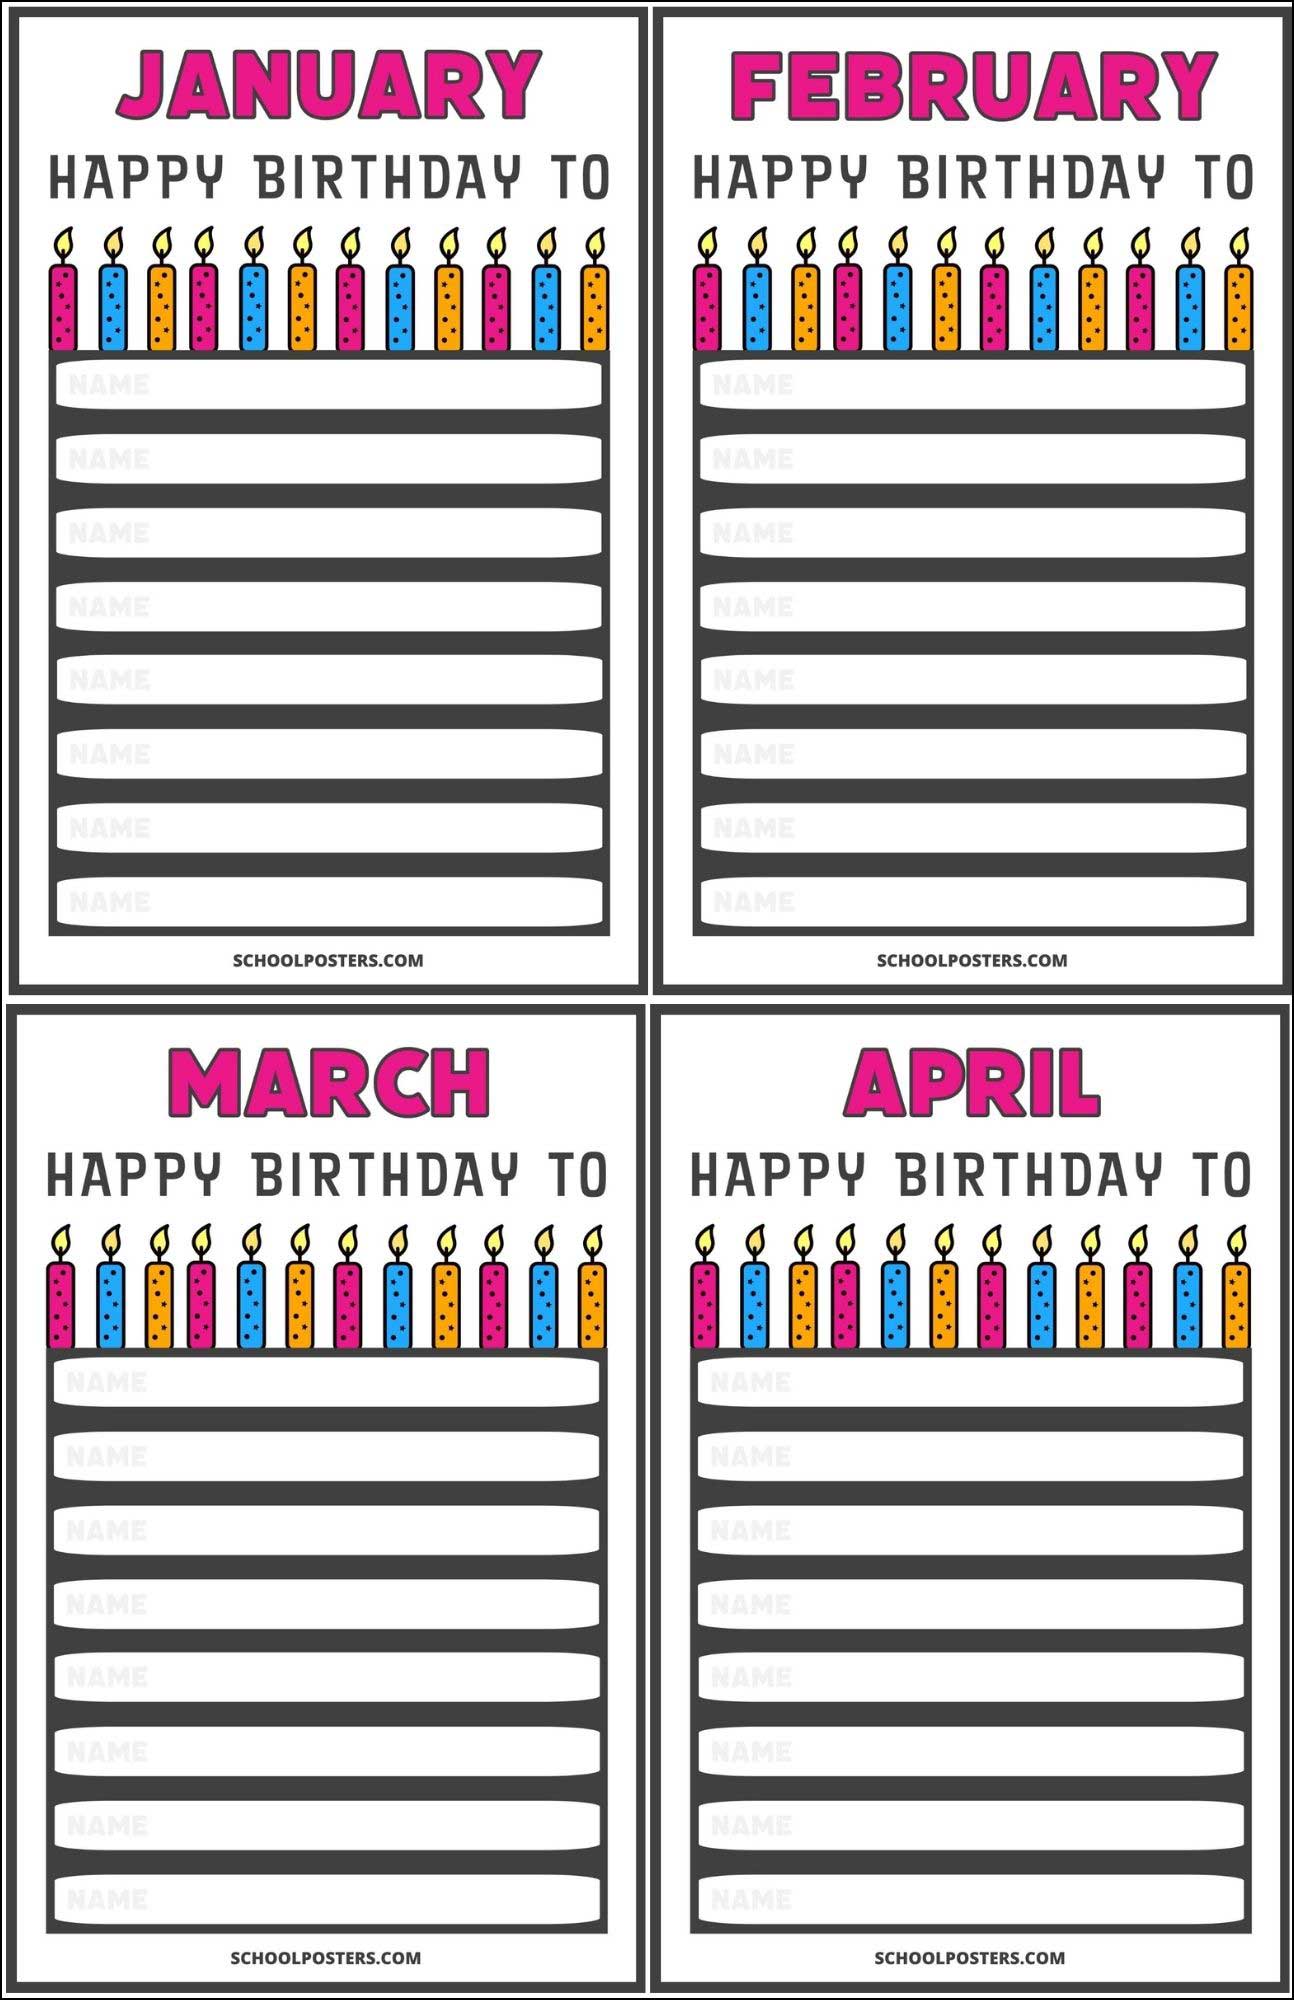 Monthly Classroom Birthday Poster Package (Dry Erase, Set of 12)